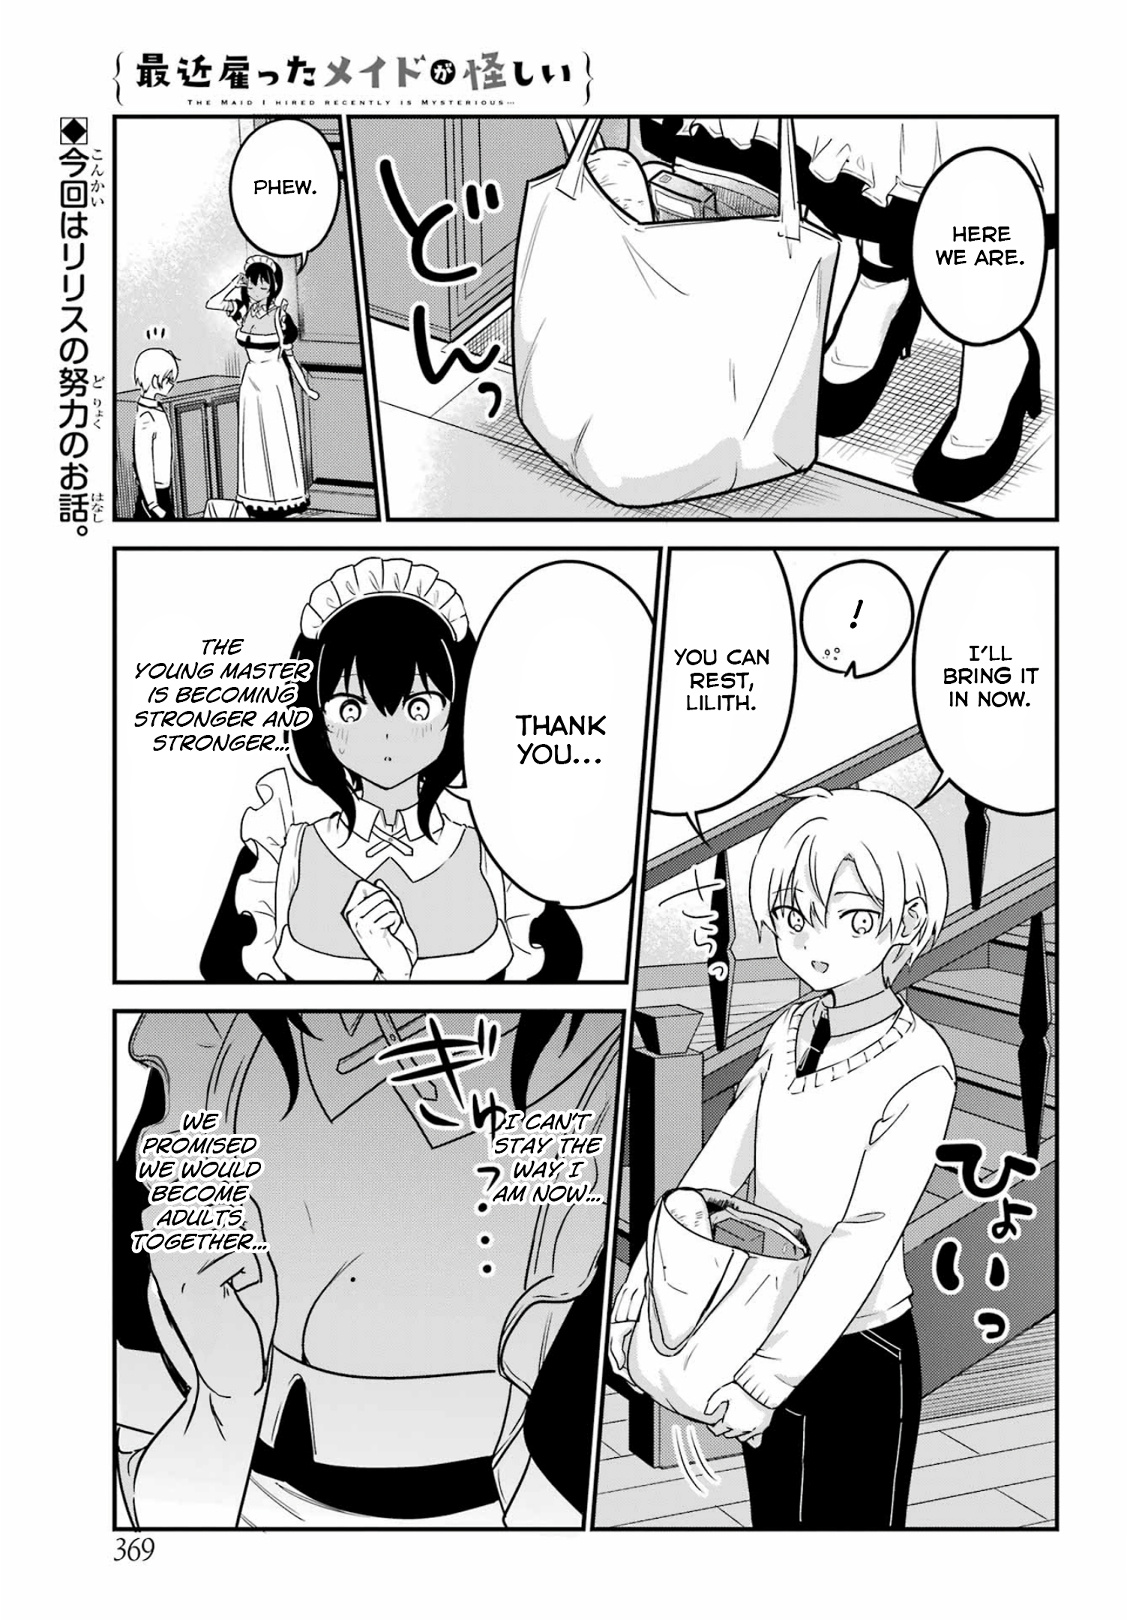 My Recently Hired Maid Is Suspicious (Serialization) - Page 1